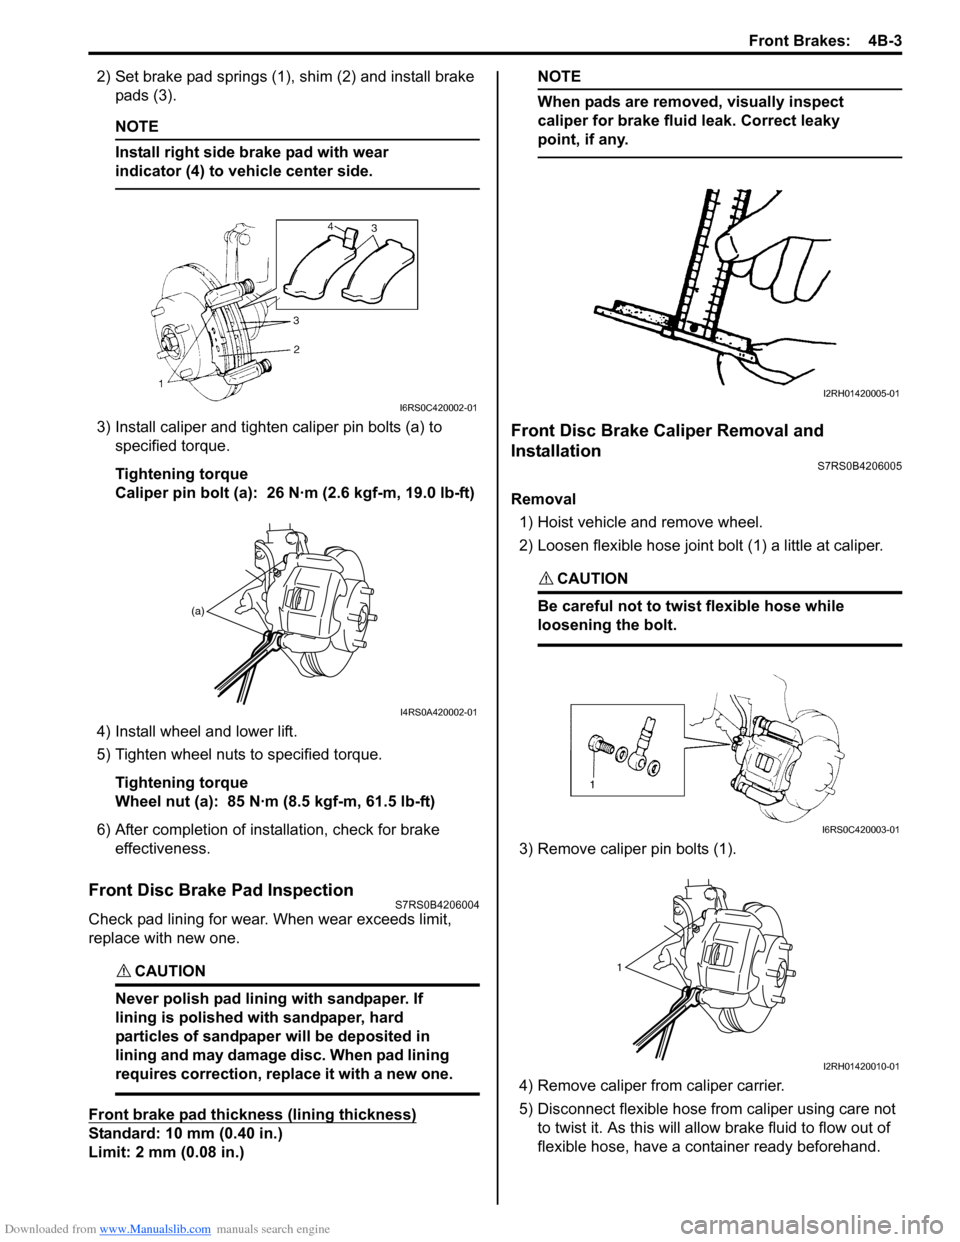 SUZUKI SWIFT 2005 2.G Service Workshop Manual Downloaded from www.Manualslib.com manuals search engine Front Brakes:  4B-3
2) Set brake pad springs (1), shim (2) and install brake pads (3).
NOTE
Install right side brake pad with wear 
indicator (